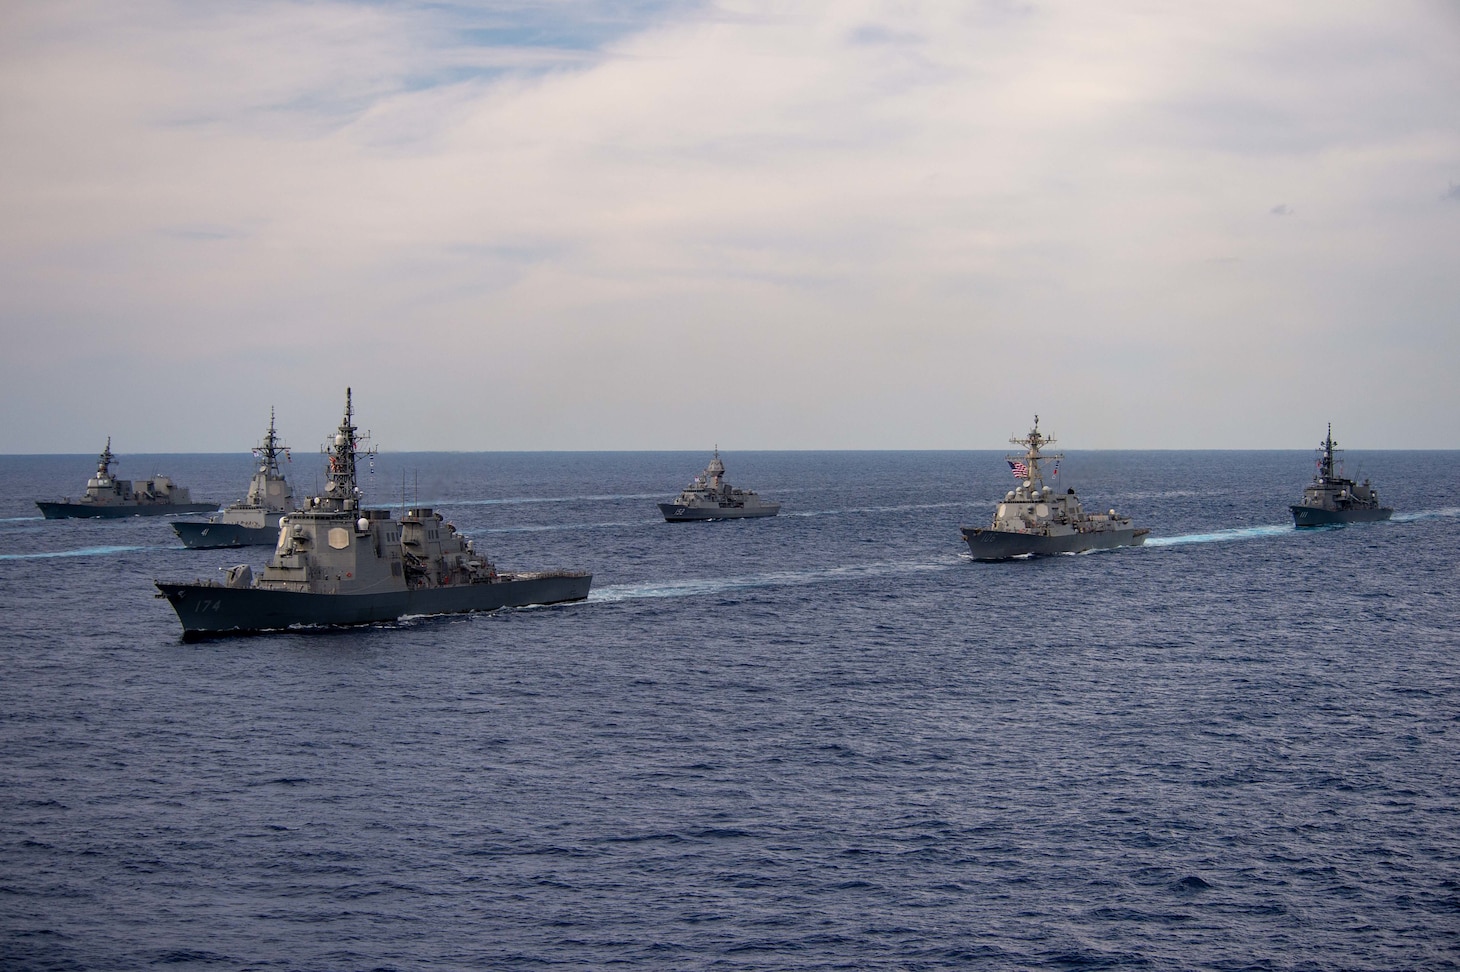 The Japan Maritime Self-Defense Force (JMSDF) Akizuki-class destroyer JS Teruzuki (DD 116), left, and other multinational ships sail in formation during Annual Exercise (ANNUALEX).